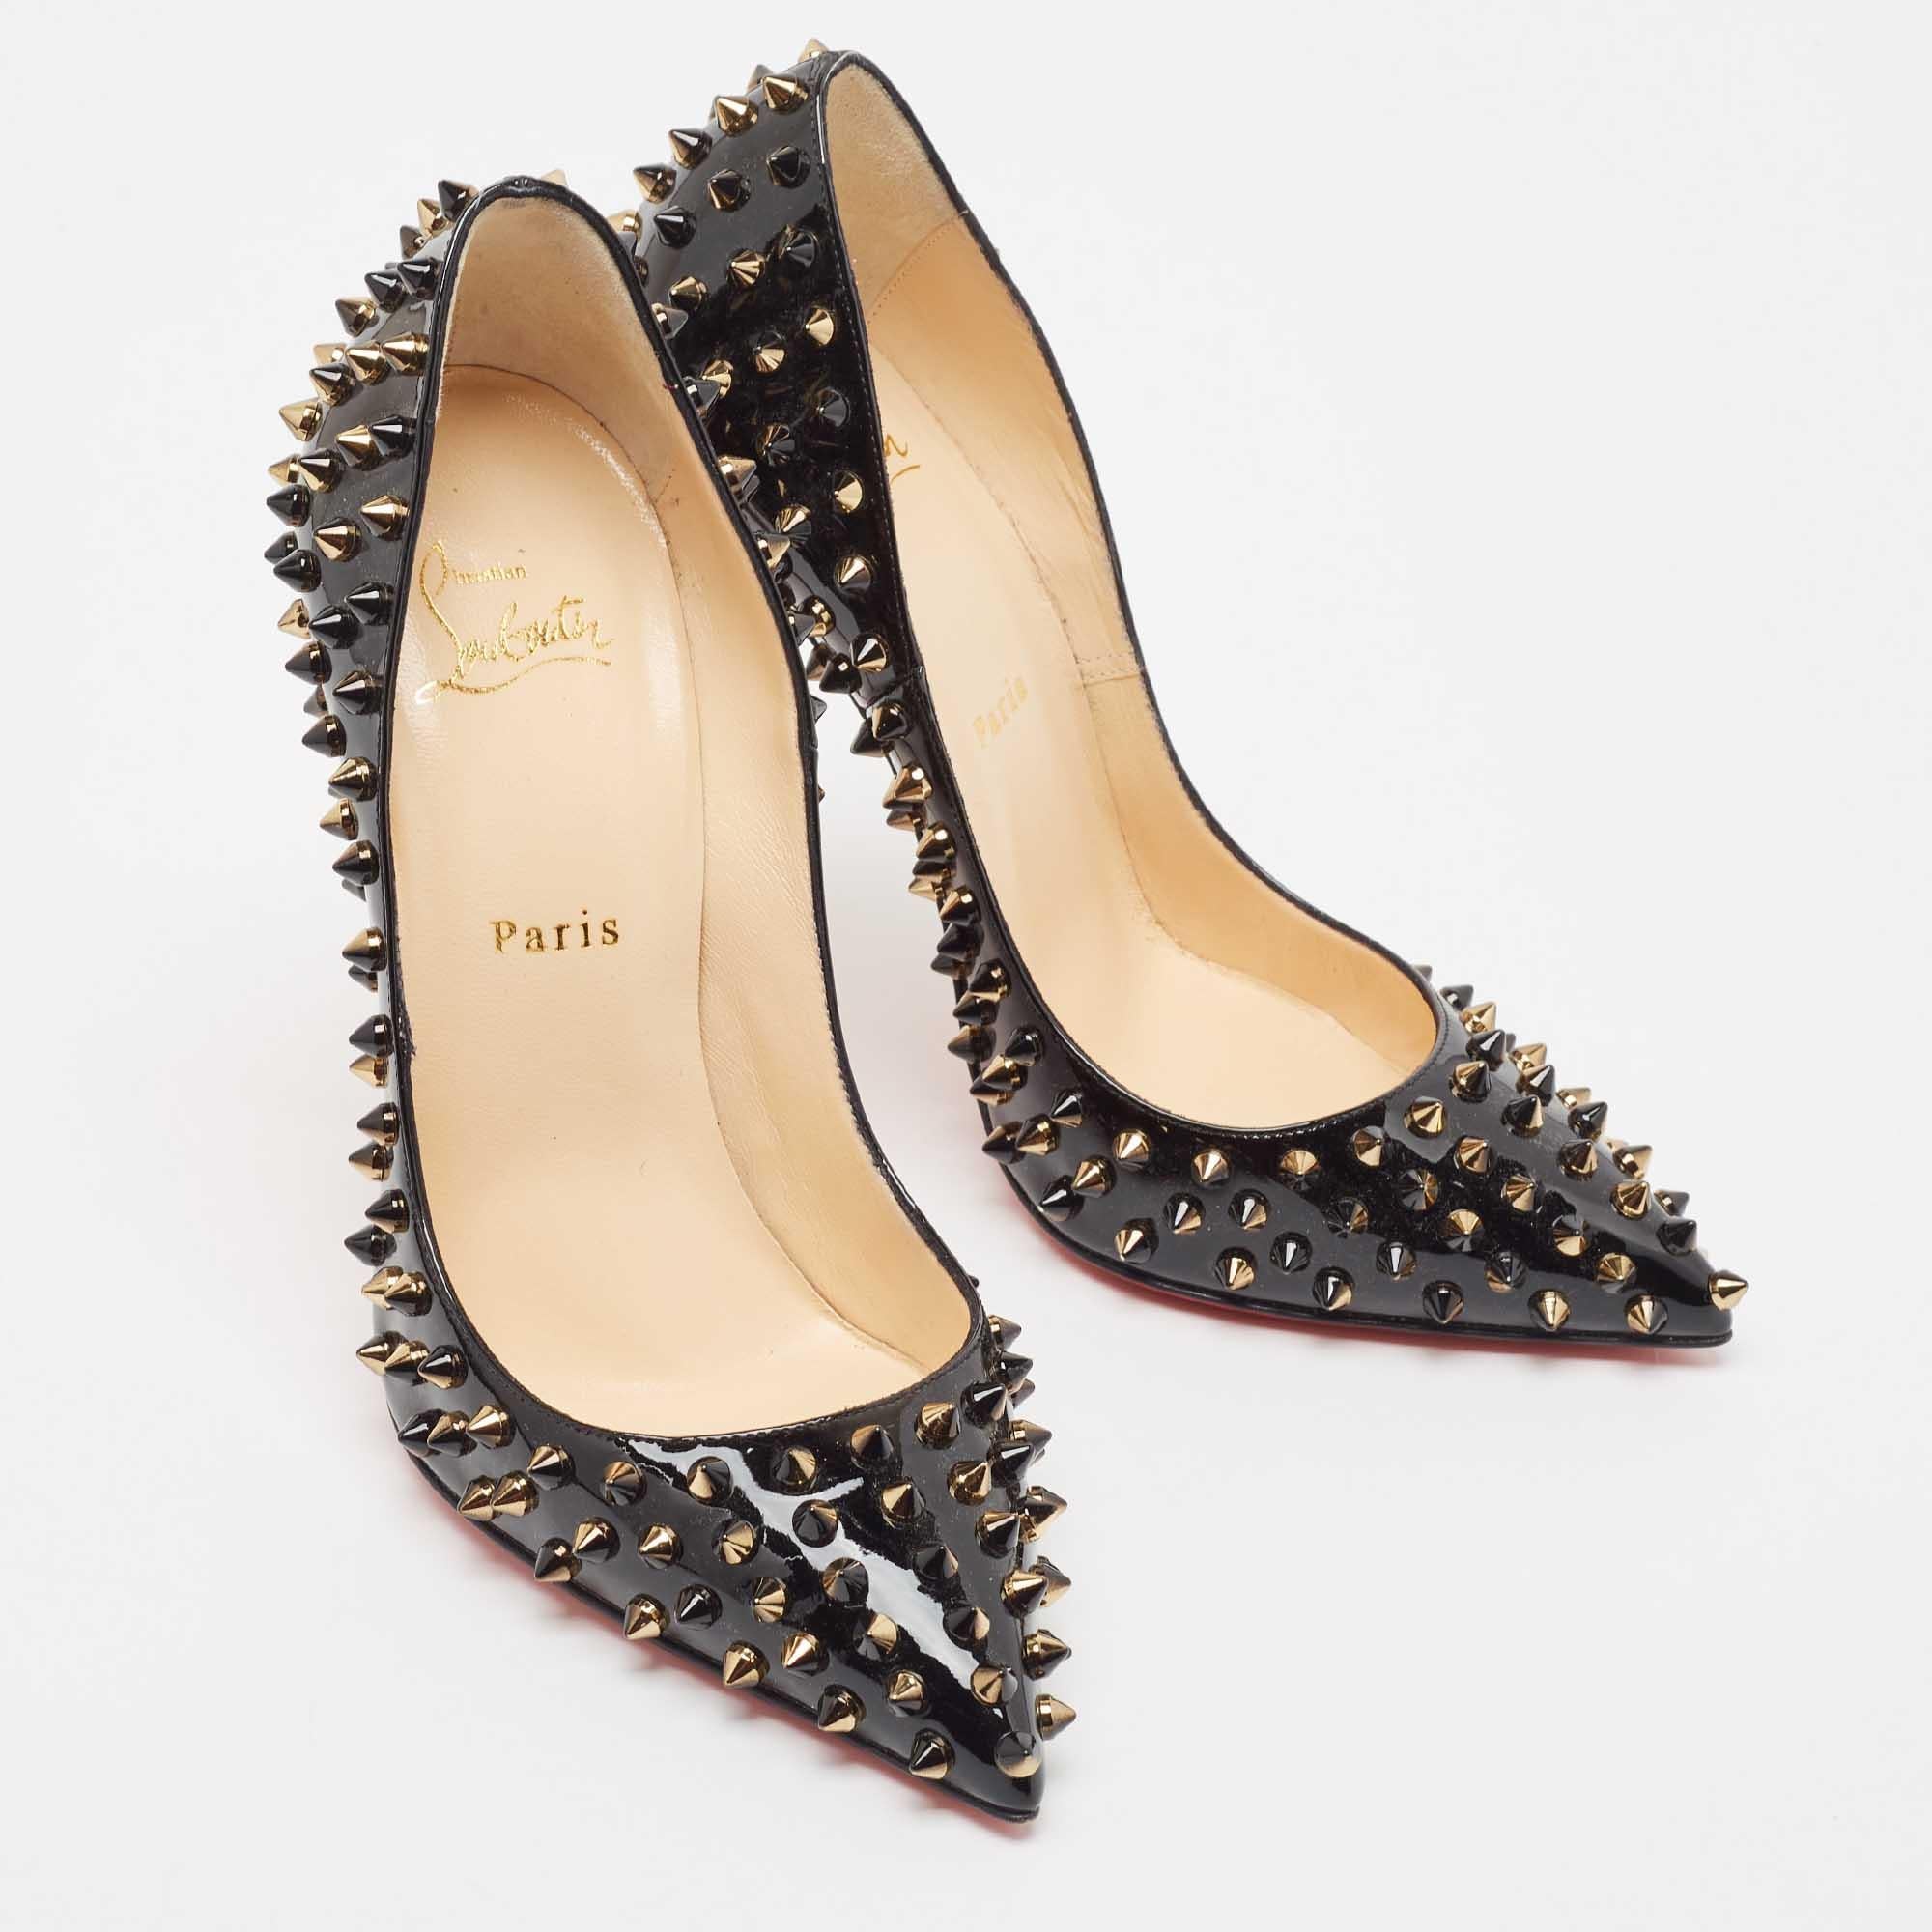 Make a chic style statement with these Christian Louboutin pumps. They showcase sturdy heels and durable soles, perfect for your fashionable outings!

